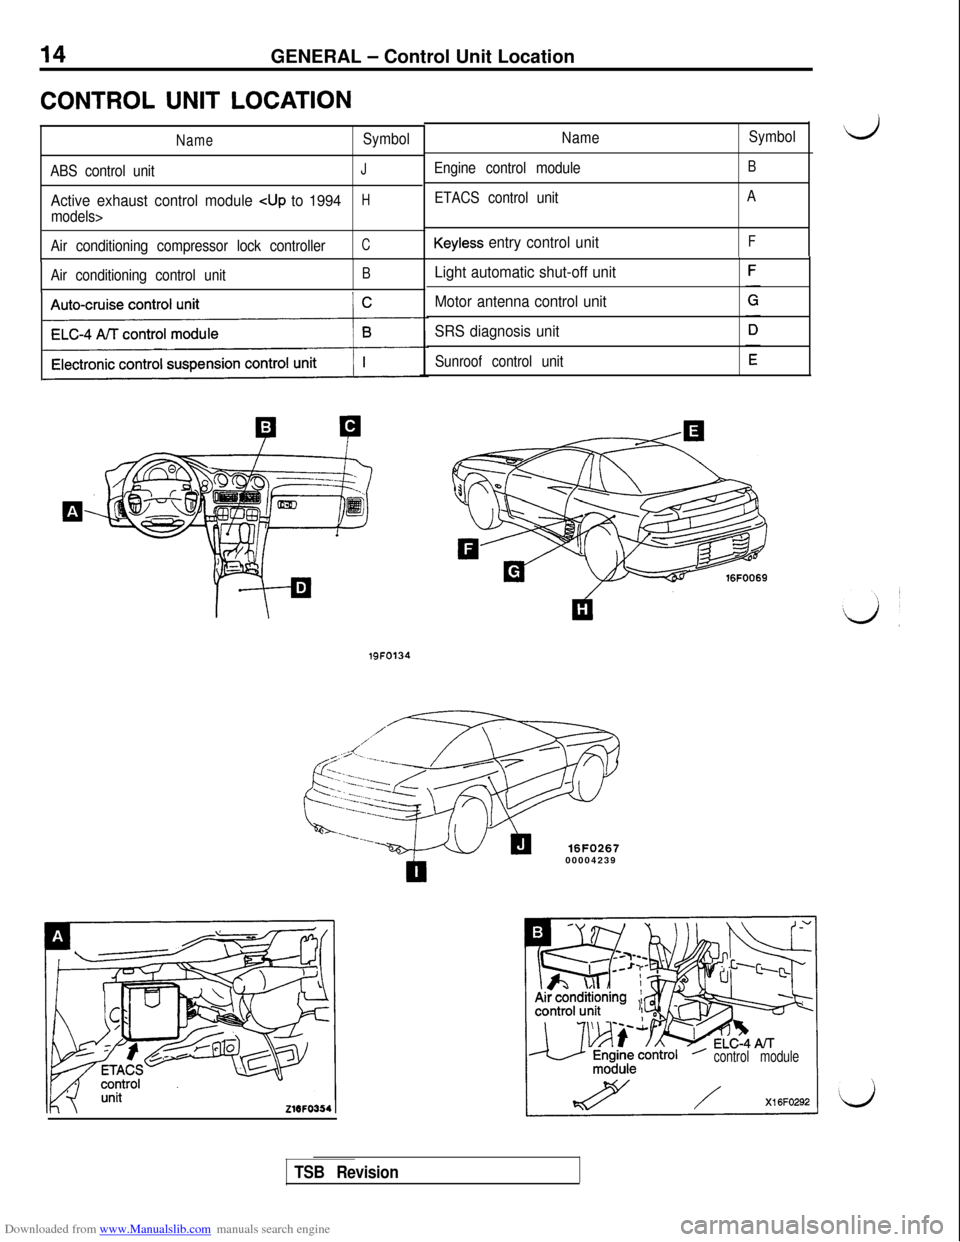 MITSUBISHI 3000GT 1994 2.G User Guide Downloaded from www.Manualslib.com manuals search engine 14GENERAL - Control Unit Location
CONTROL UNIT LOCATION
NameSymbol
ABS control unit
J
Active exhaust control module cup to 1994H
models>
Air co